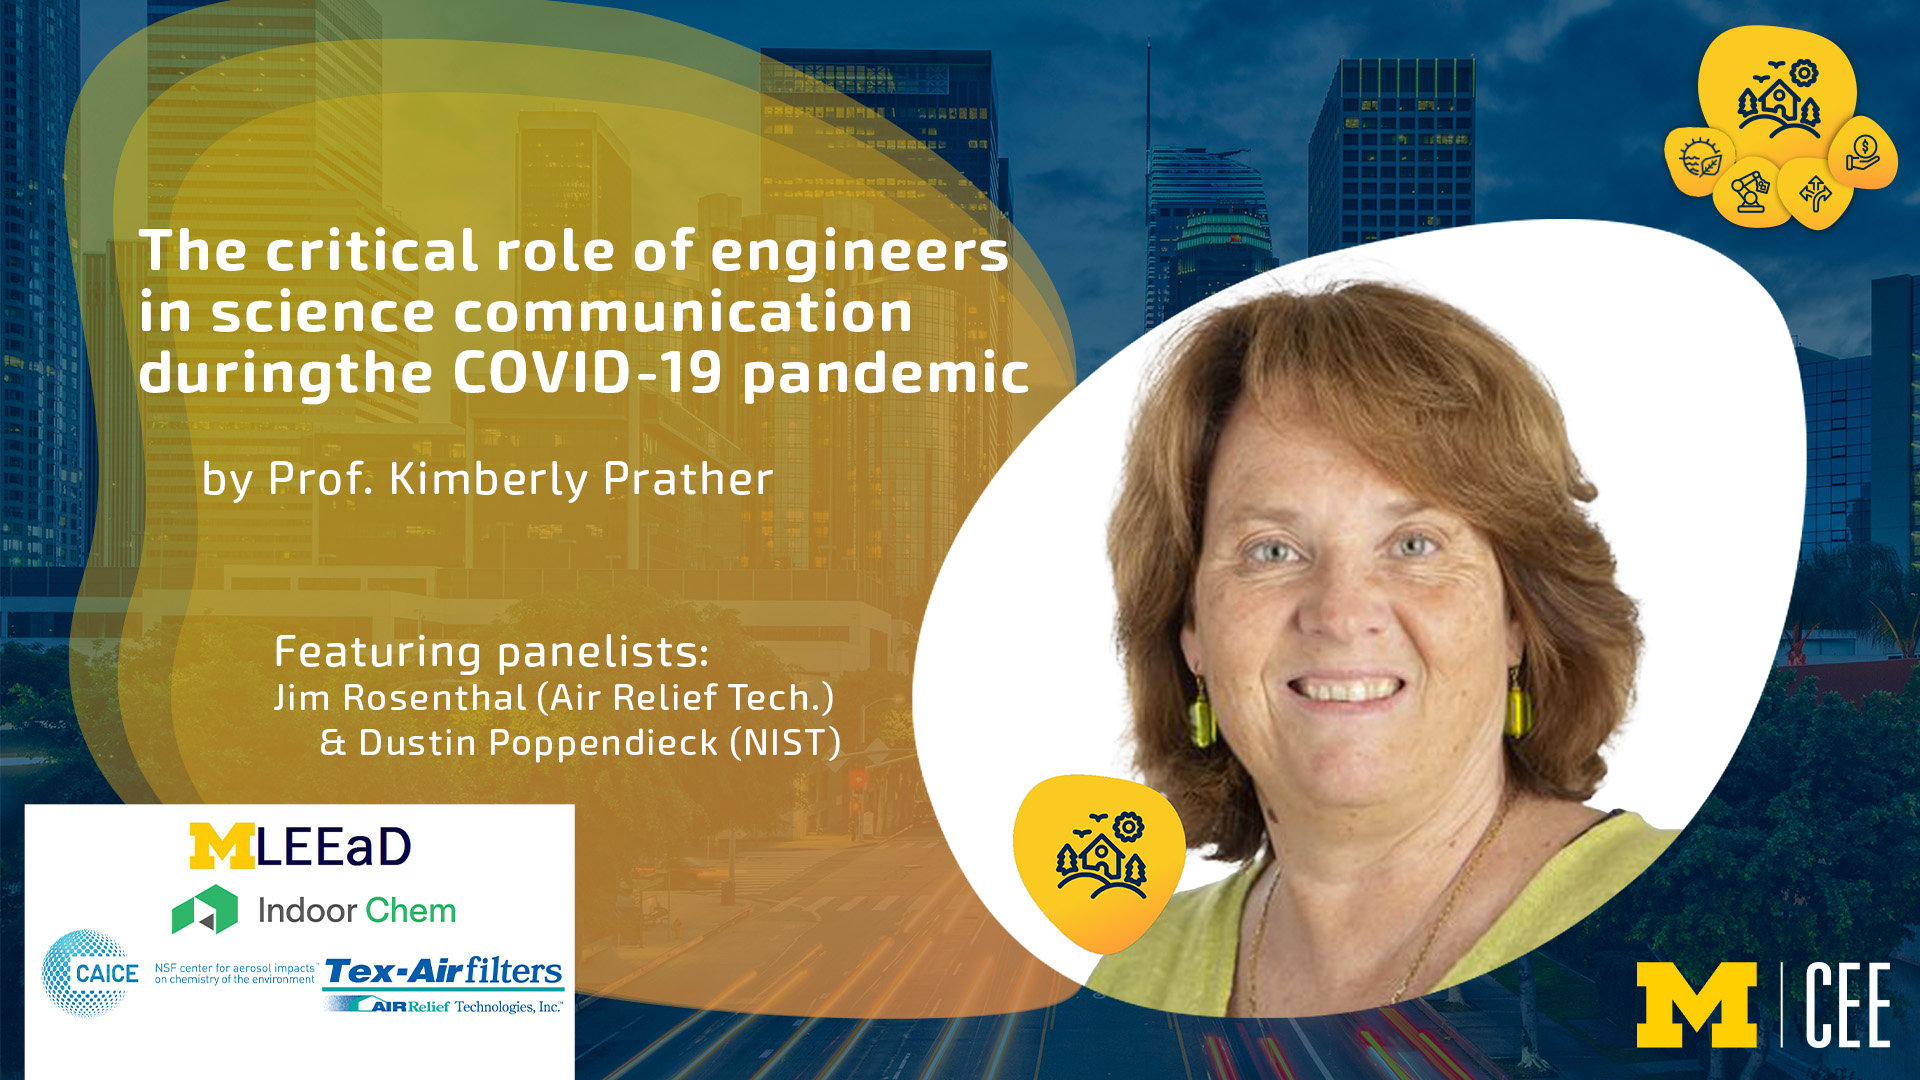 Prof. Kim Prather discusses "The role of engineers in science communication during the Covid-19 pandemic" in a January 31 webinar. Dr. Prather is shown with the Human Habitat Experience logo and the sponsors of the webinar.